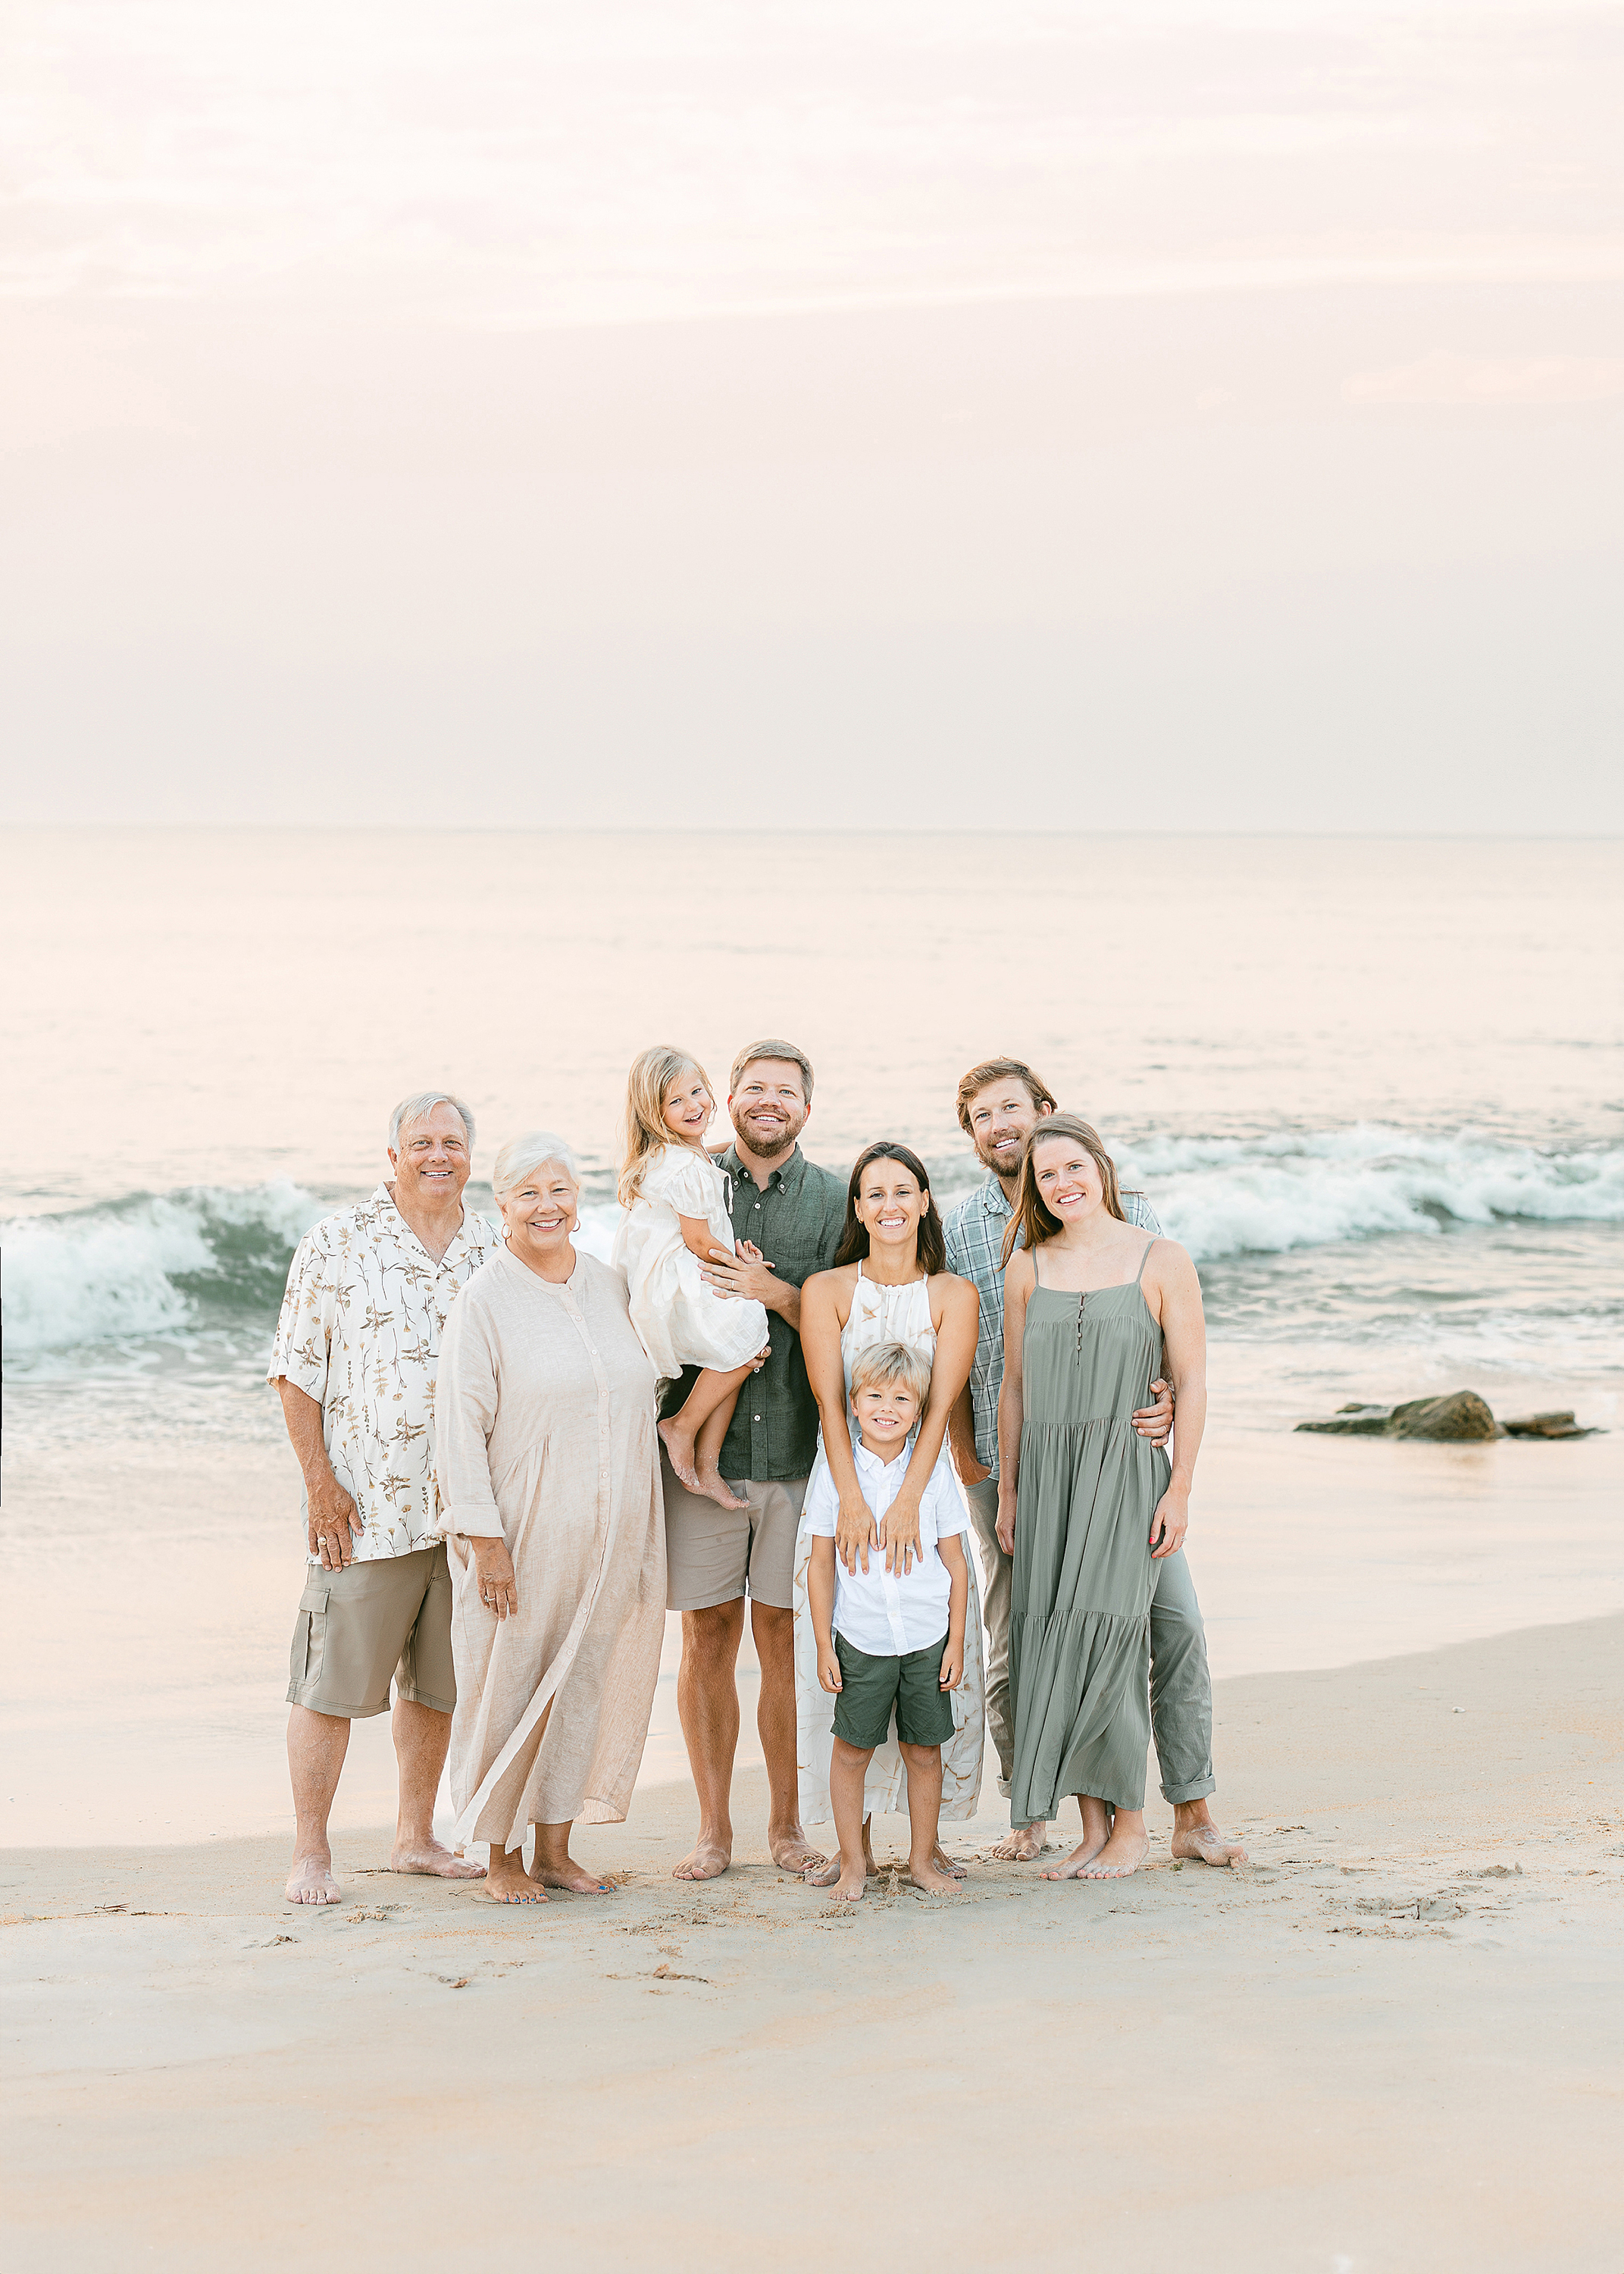 An extended family beach portrait in Saint Augustine, Florida.